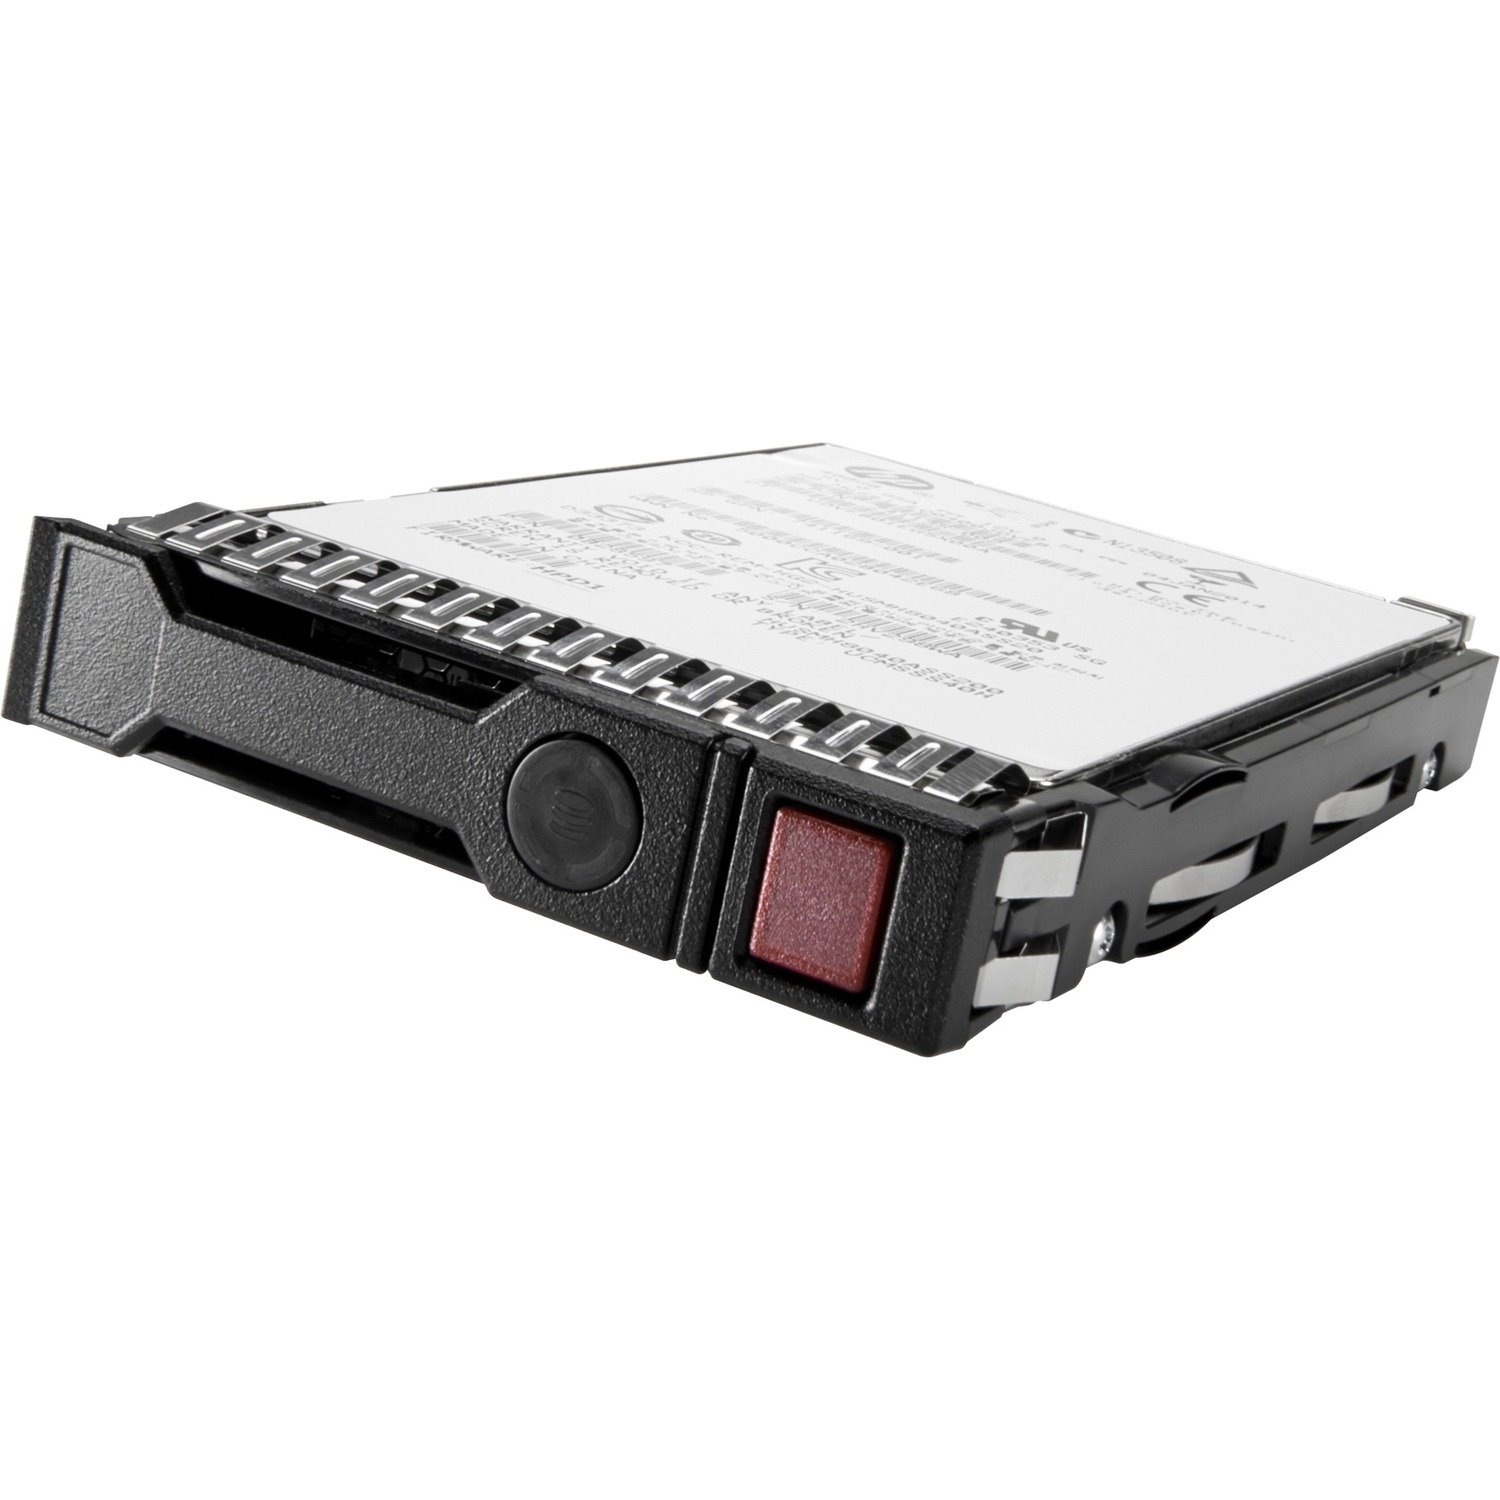 HPE Sourcing 600 GB Solid State Drive - 2.5" Internal - SATA (SATA/600)